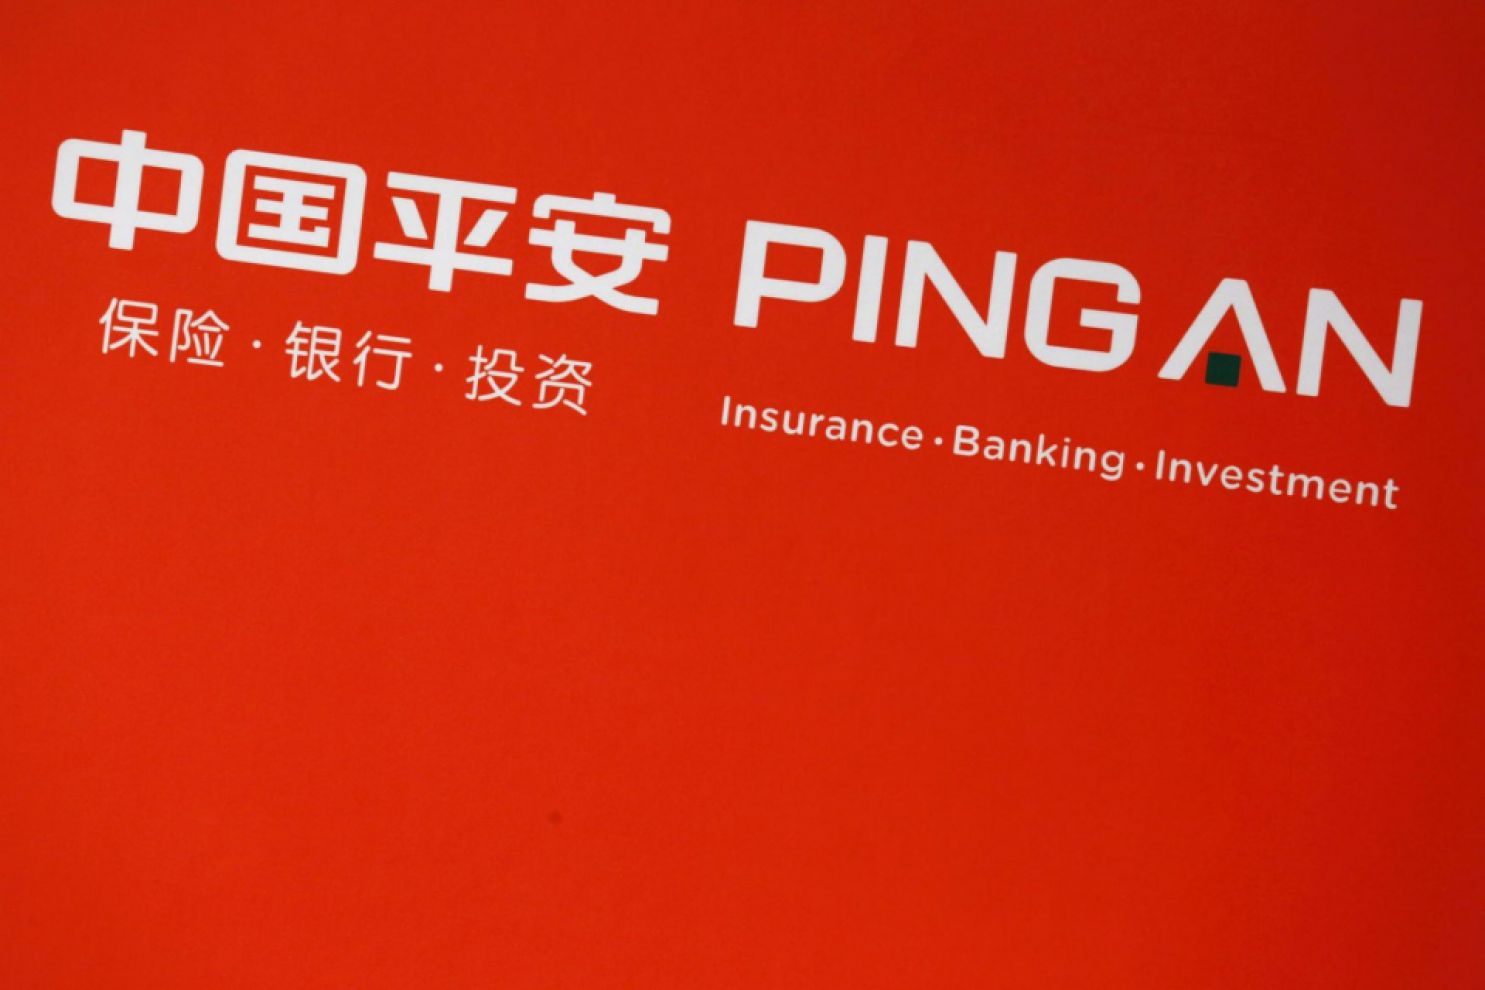 Ping An Academy sets up financial services security research facility